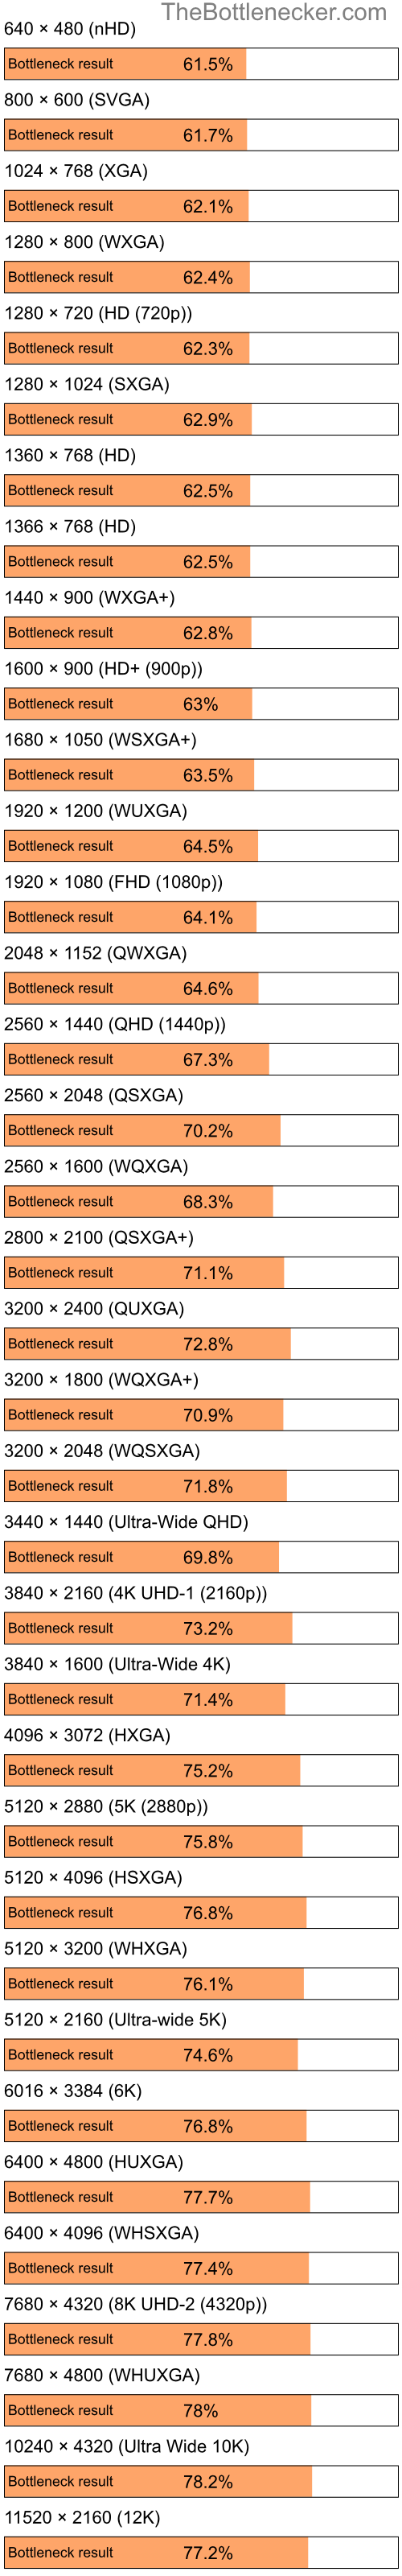 Bottleneck results by resolution for Intel Celeron and AMD Mobility Radeon HD 4250 in7 Days to Die